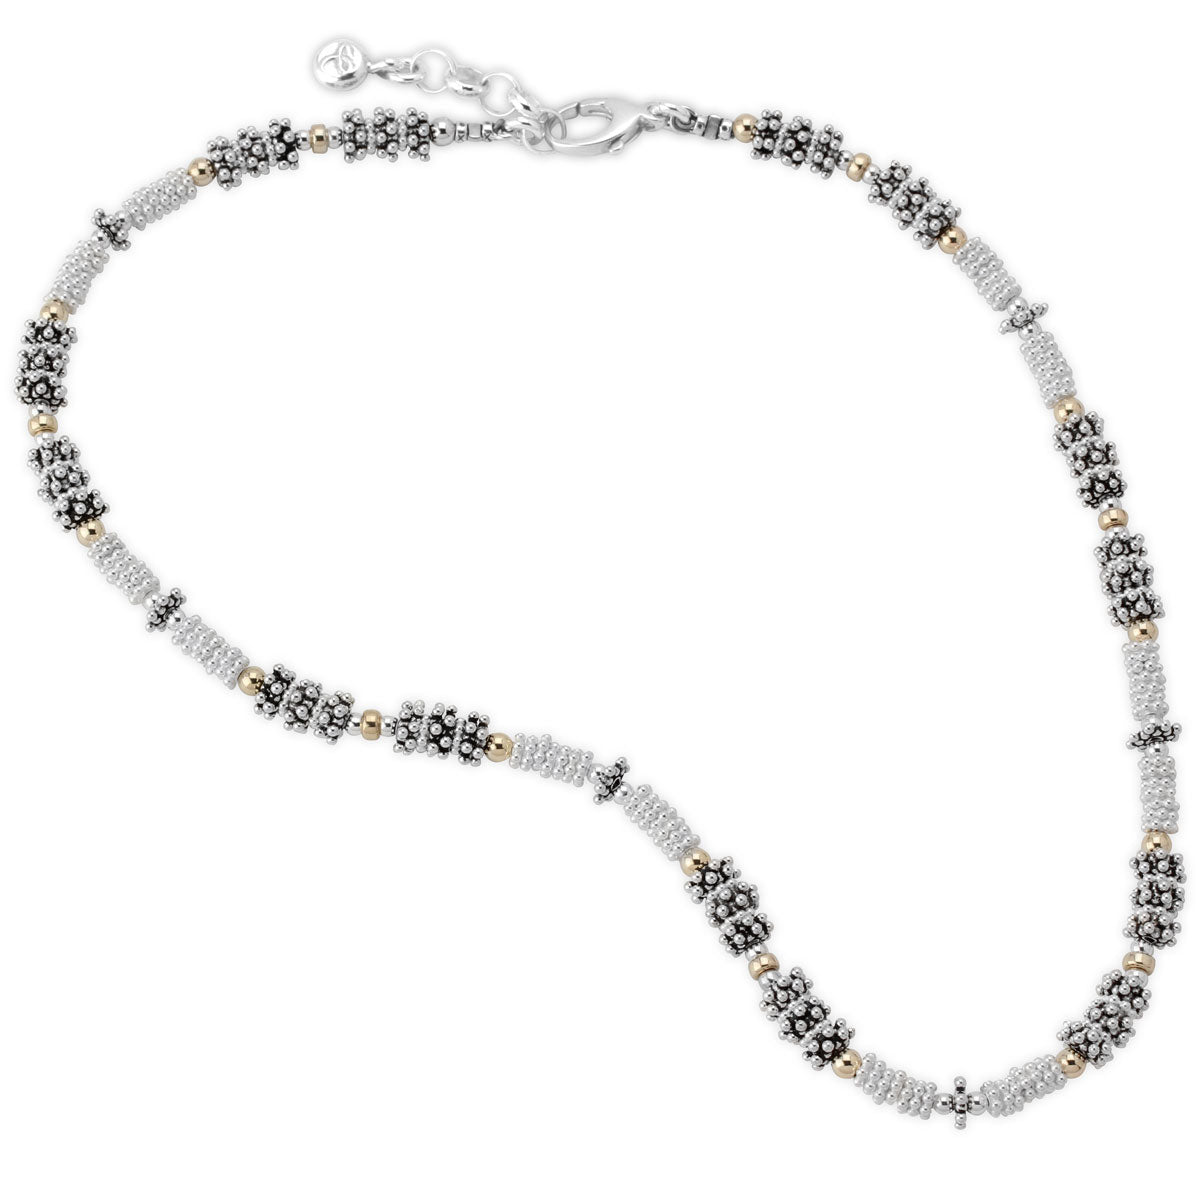 Oxidized and White Sterling Silver Necklace with 14KGF Accents-341892